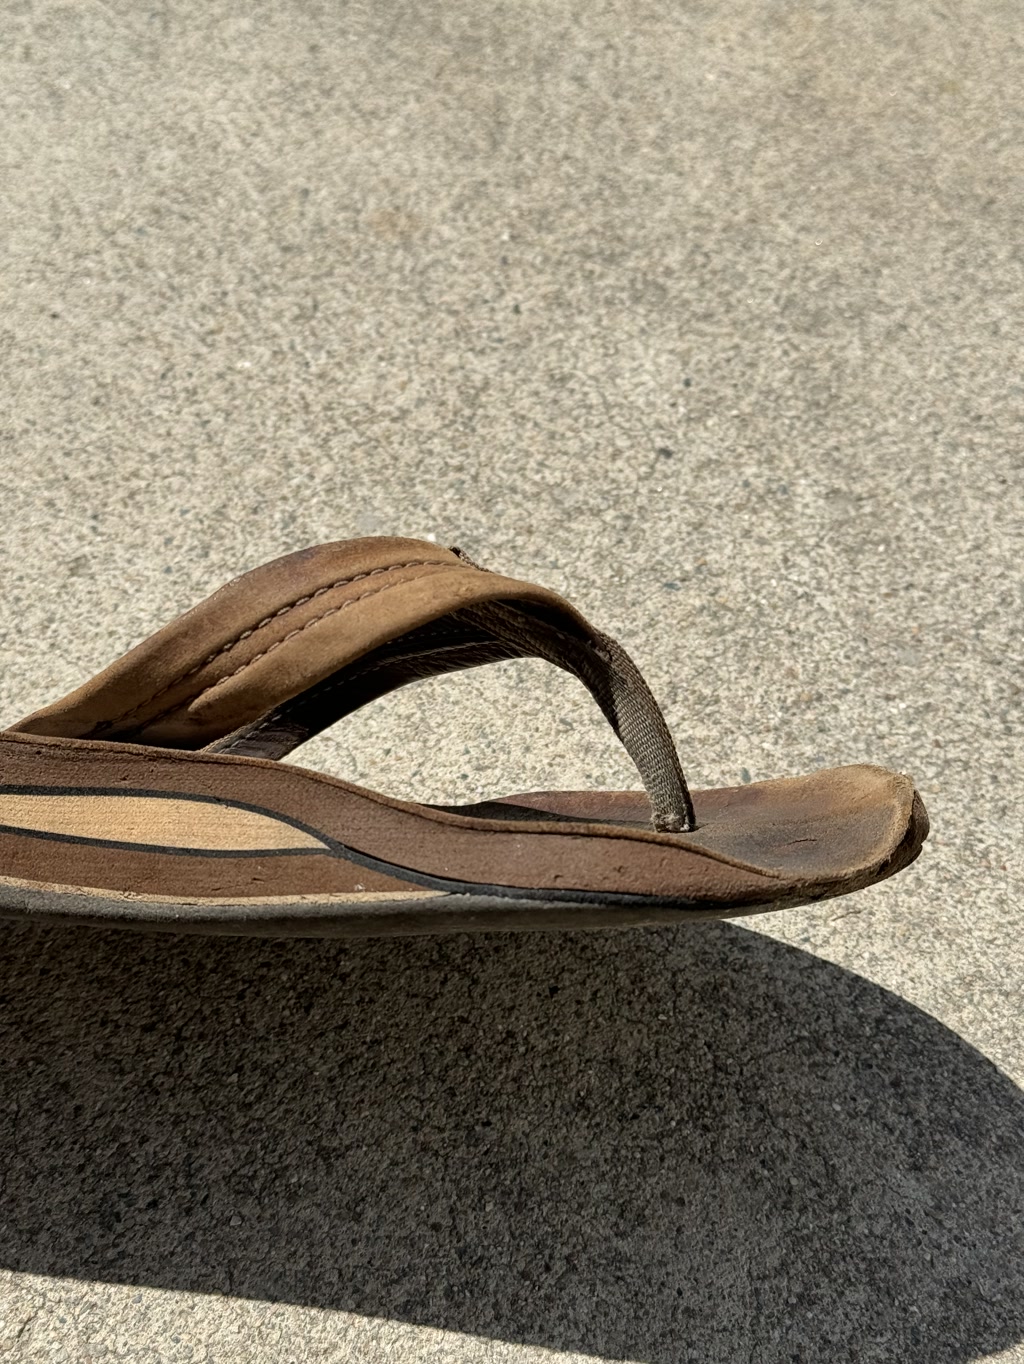 A single brown flip-flop with a dark brown strap is shown resting on a concrete surface. The flip-flop appears to be well-worn with signs of wear on both the sole and the footbed. The texture of the concrete is rough with small, scattered pebbles embedded in it. The flip-flop casts a sharp shadow on the ground, suggesting that the photo was taken in bright daylight.